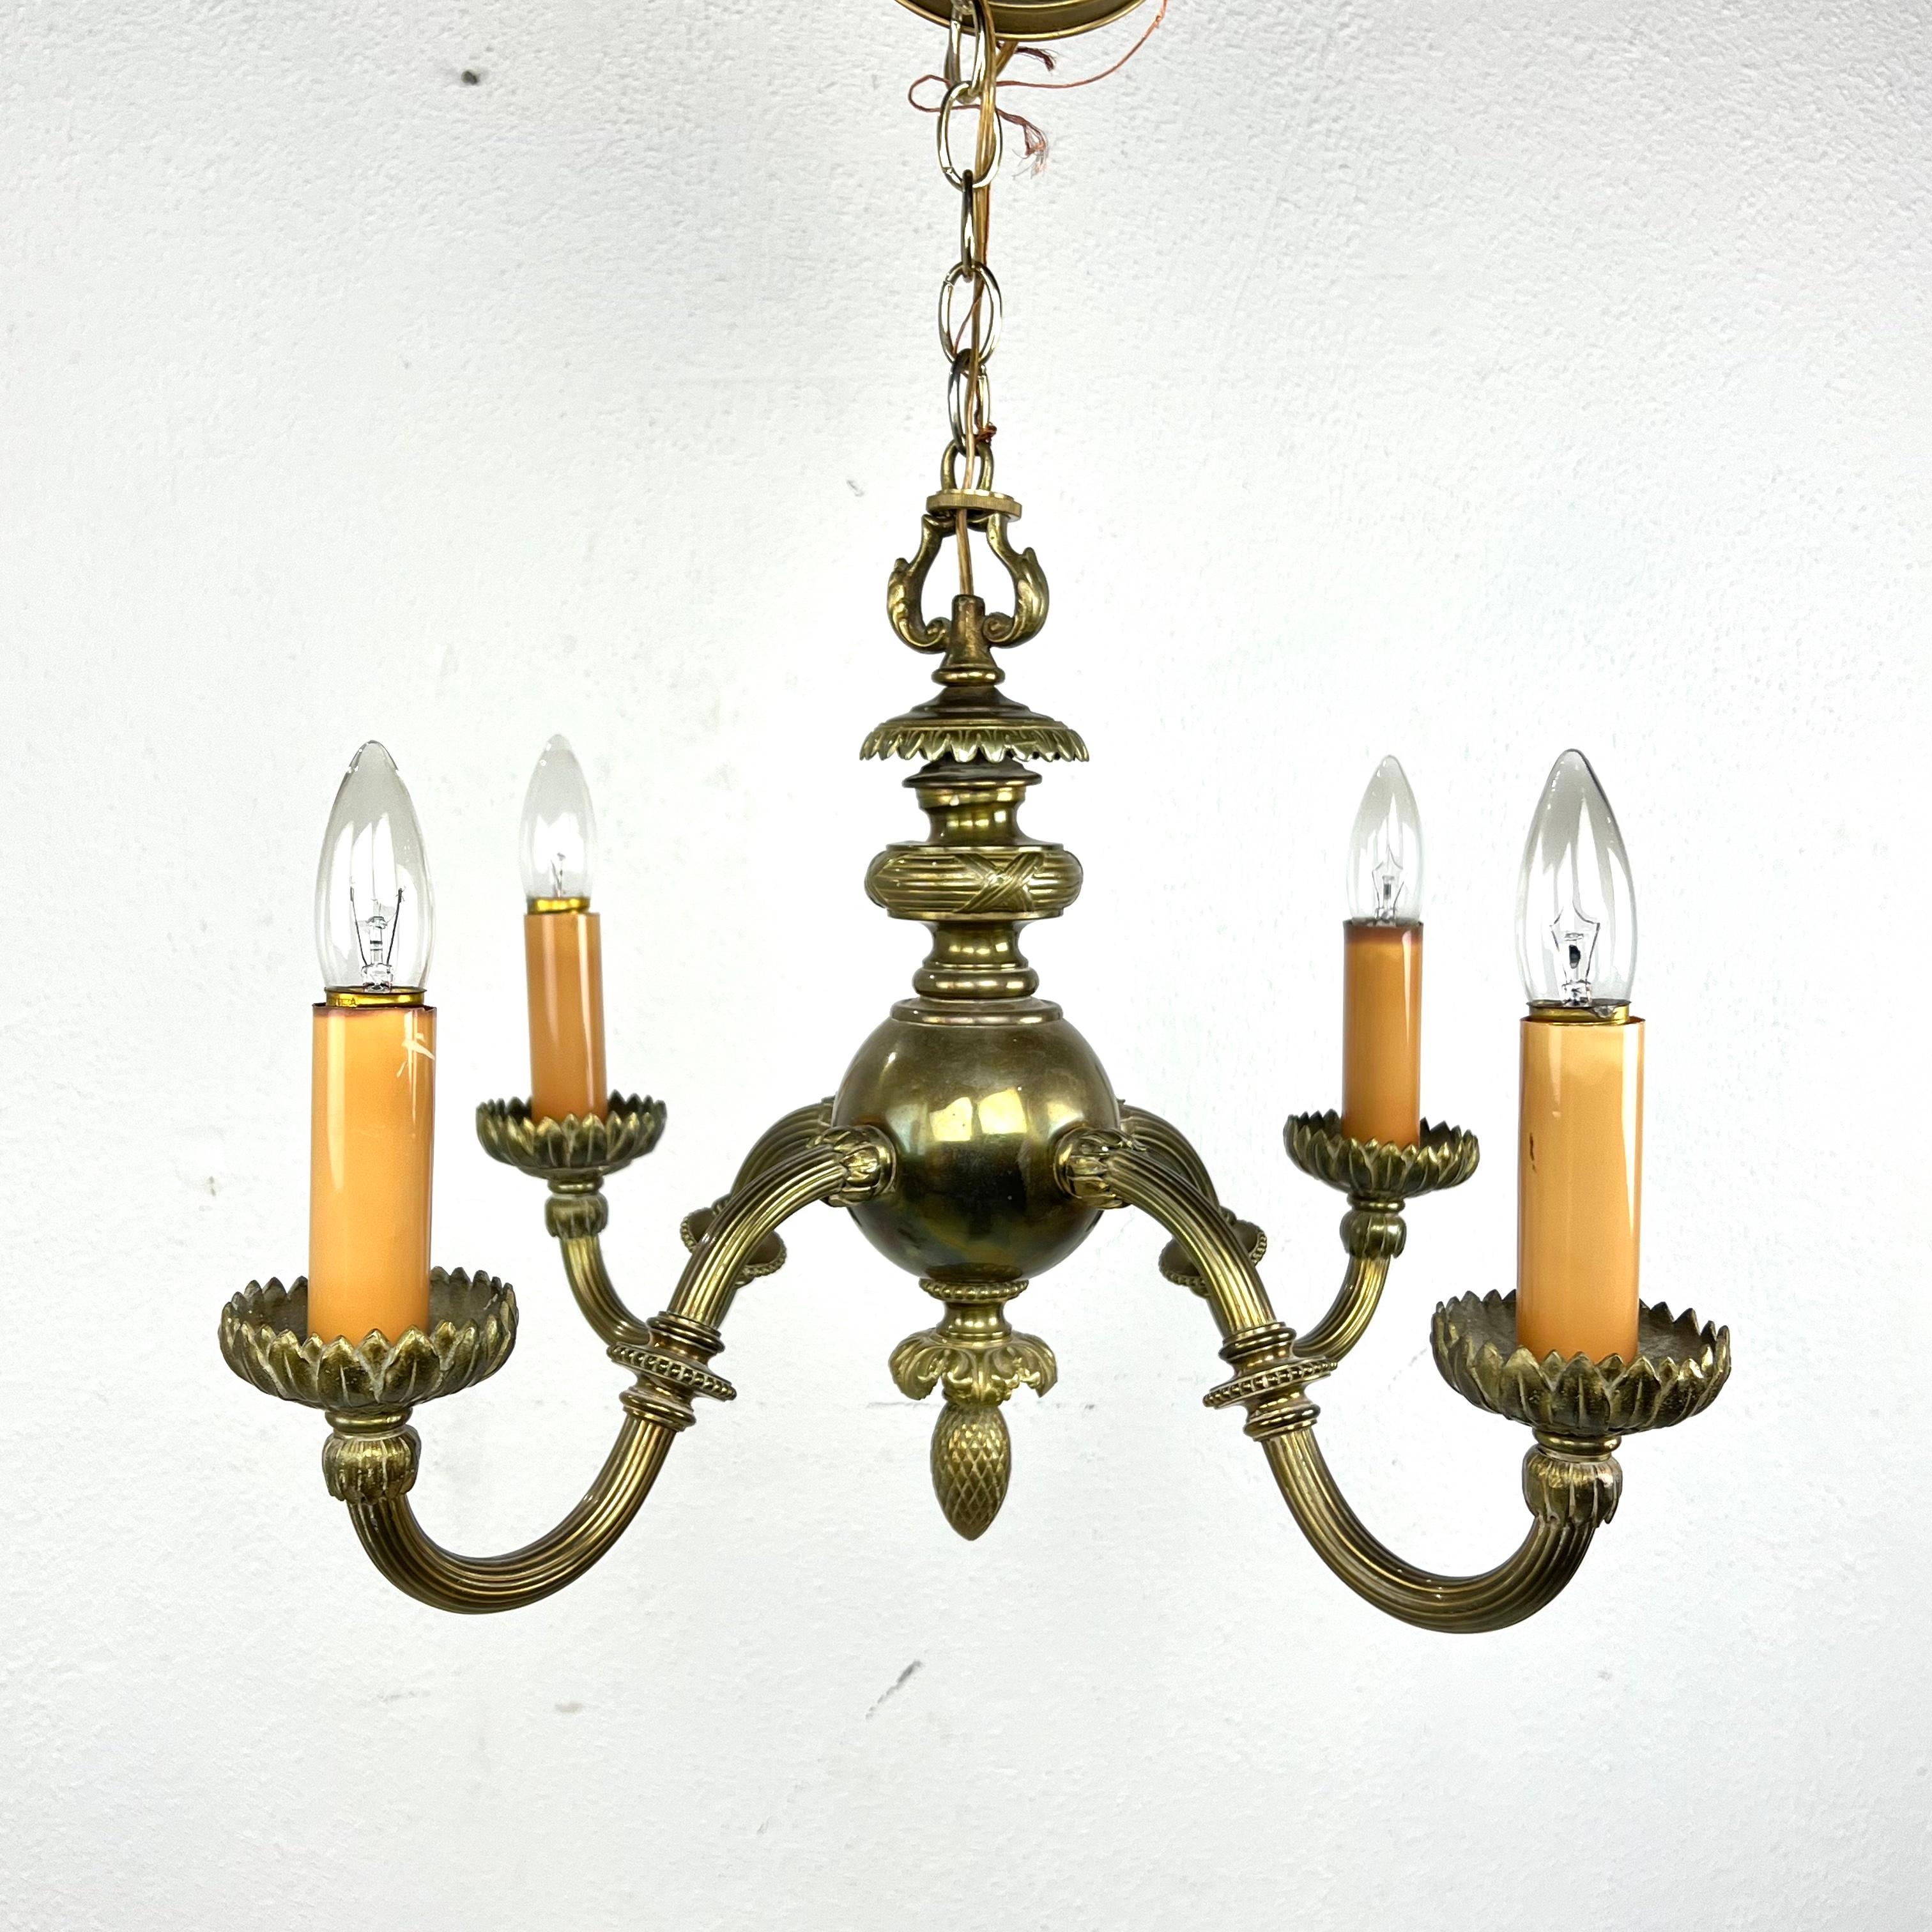 Pair of elegant early 20th Century bronze art nouveau chandeliers. Solid cast bronze with 4 substantial arms featuring sculpted lotus flowers. A rare and unique set. 